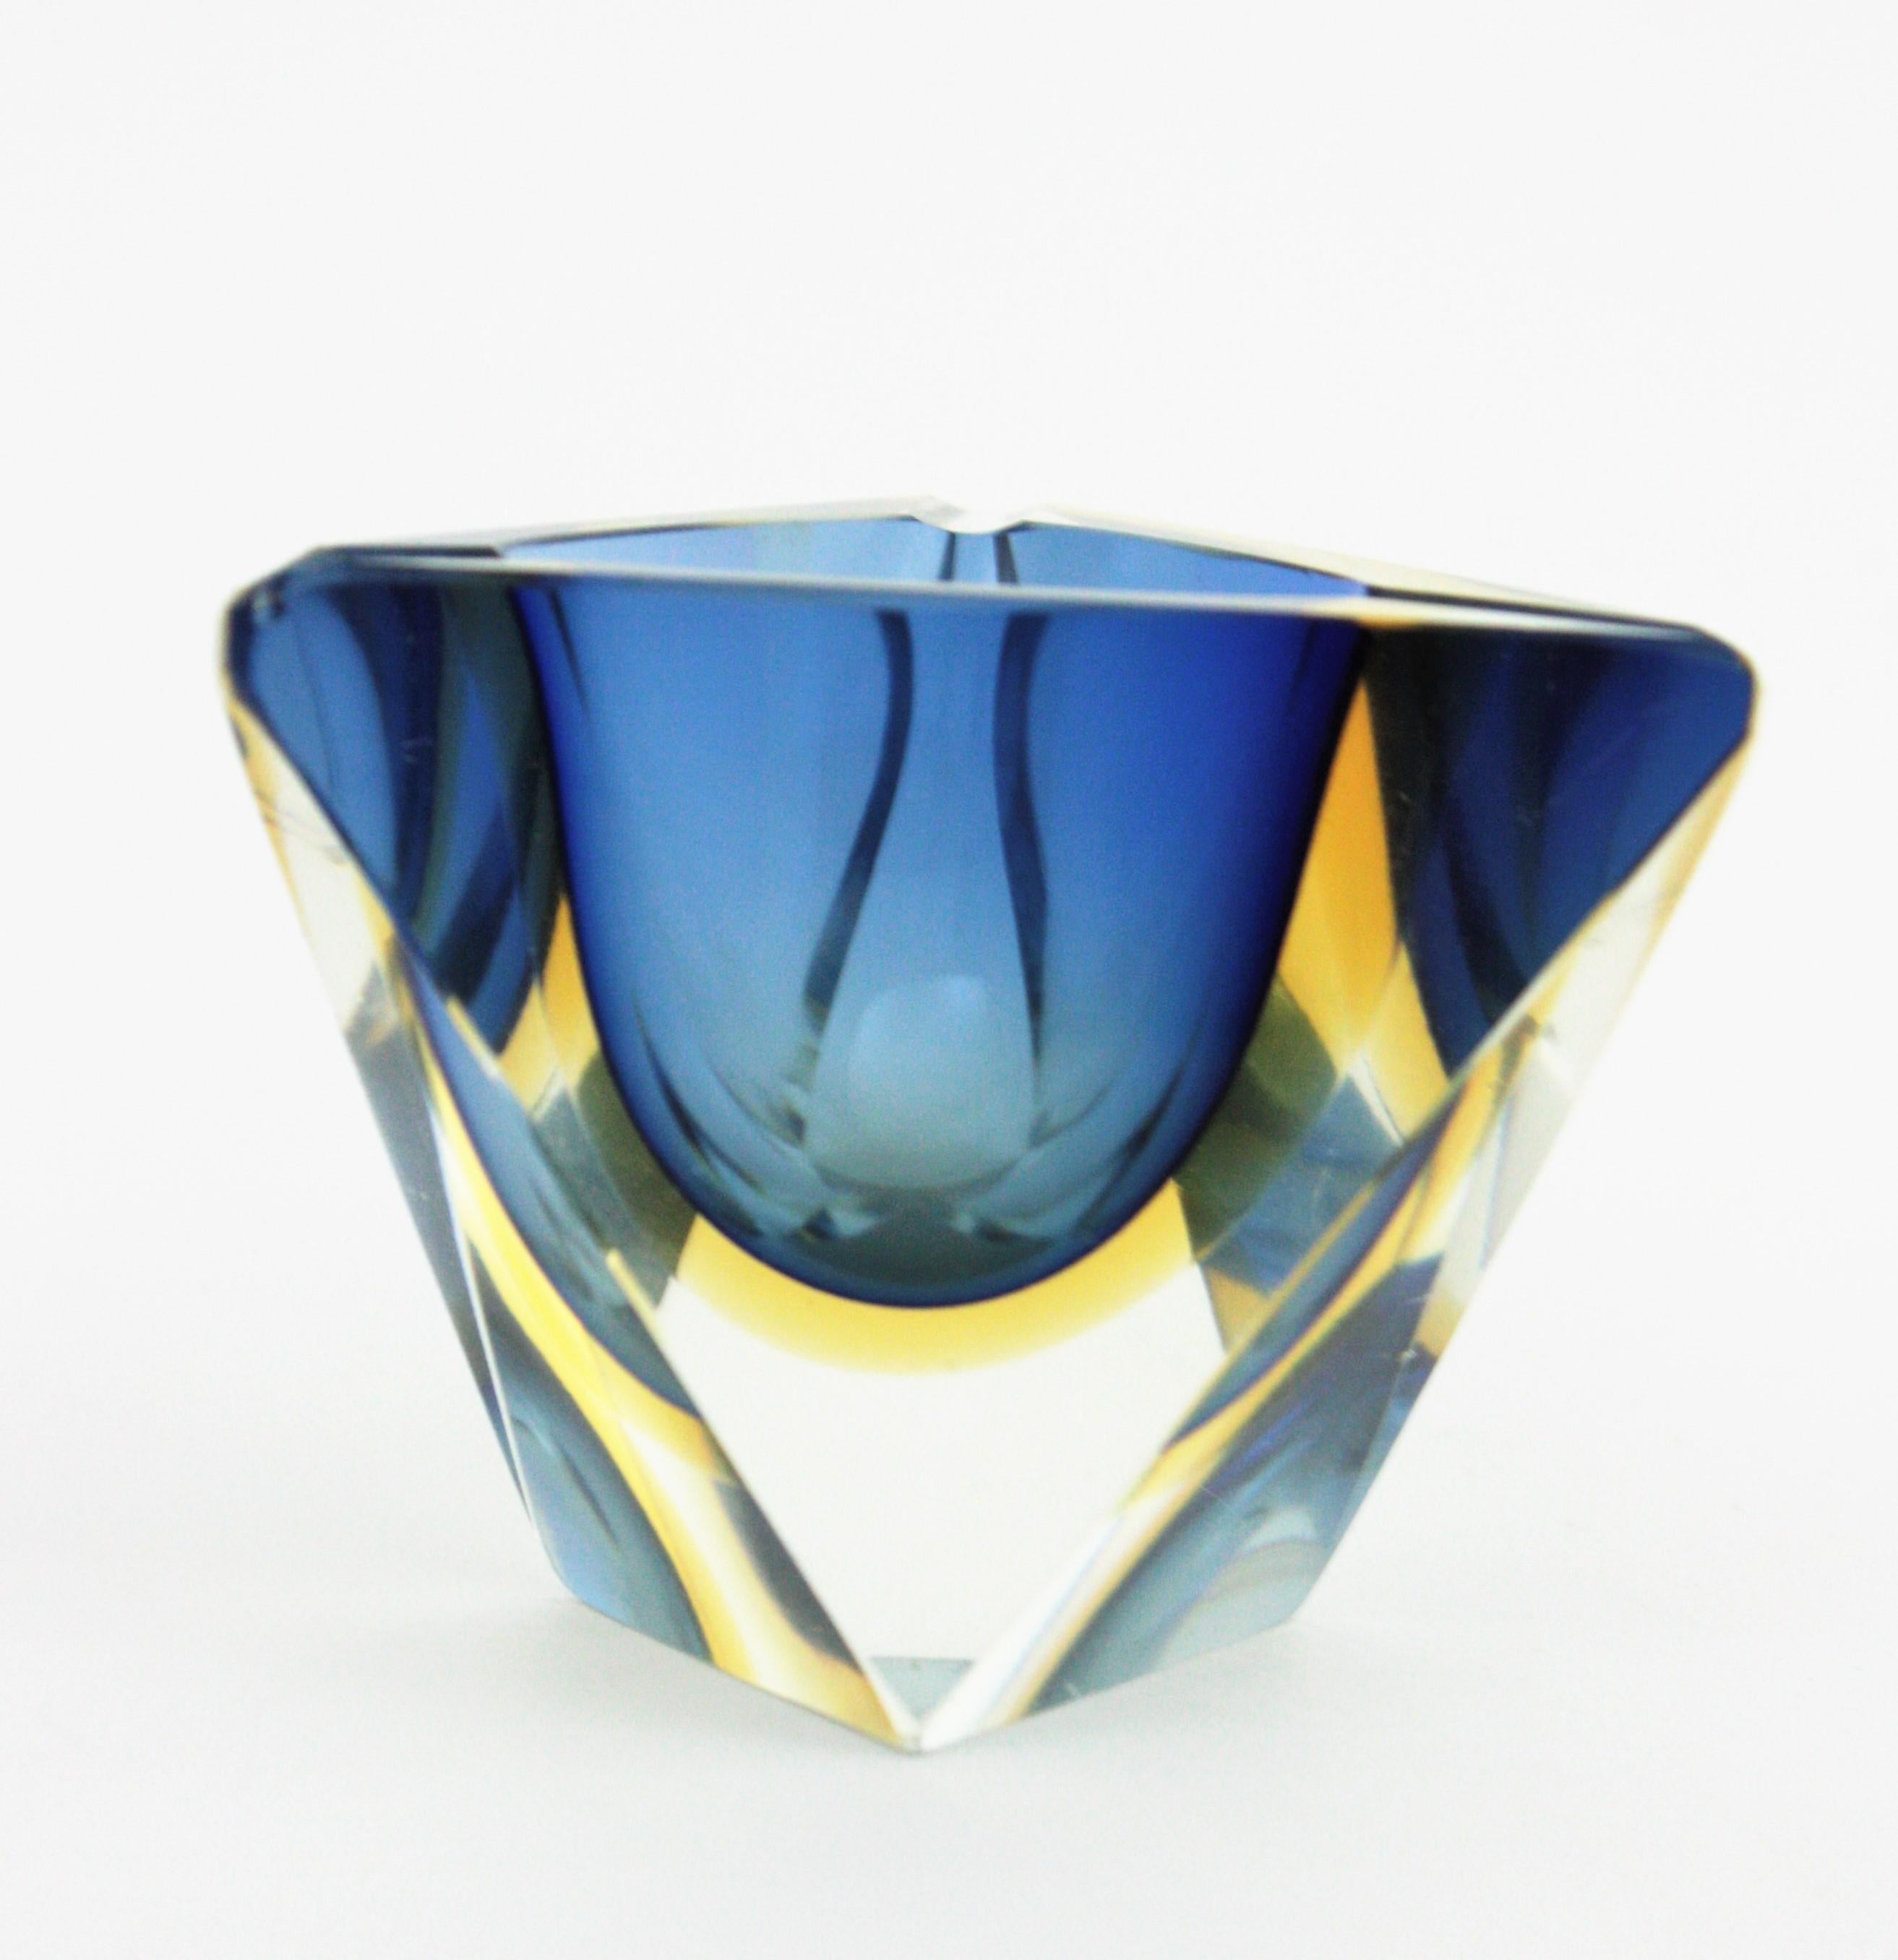 20th Century Flavio Poli Murano Sommerso Blue & Yellow Faceted Triangular Glass Ashtray Bowl For Sale